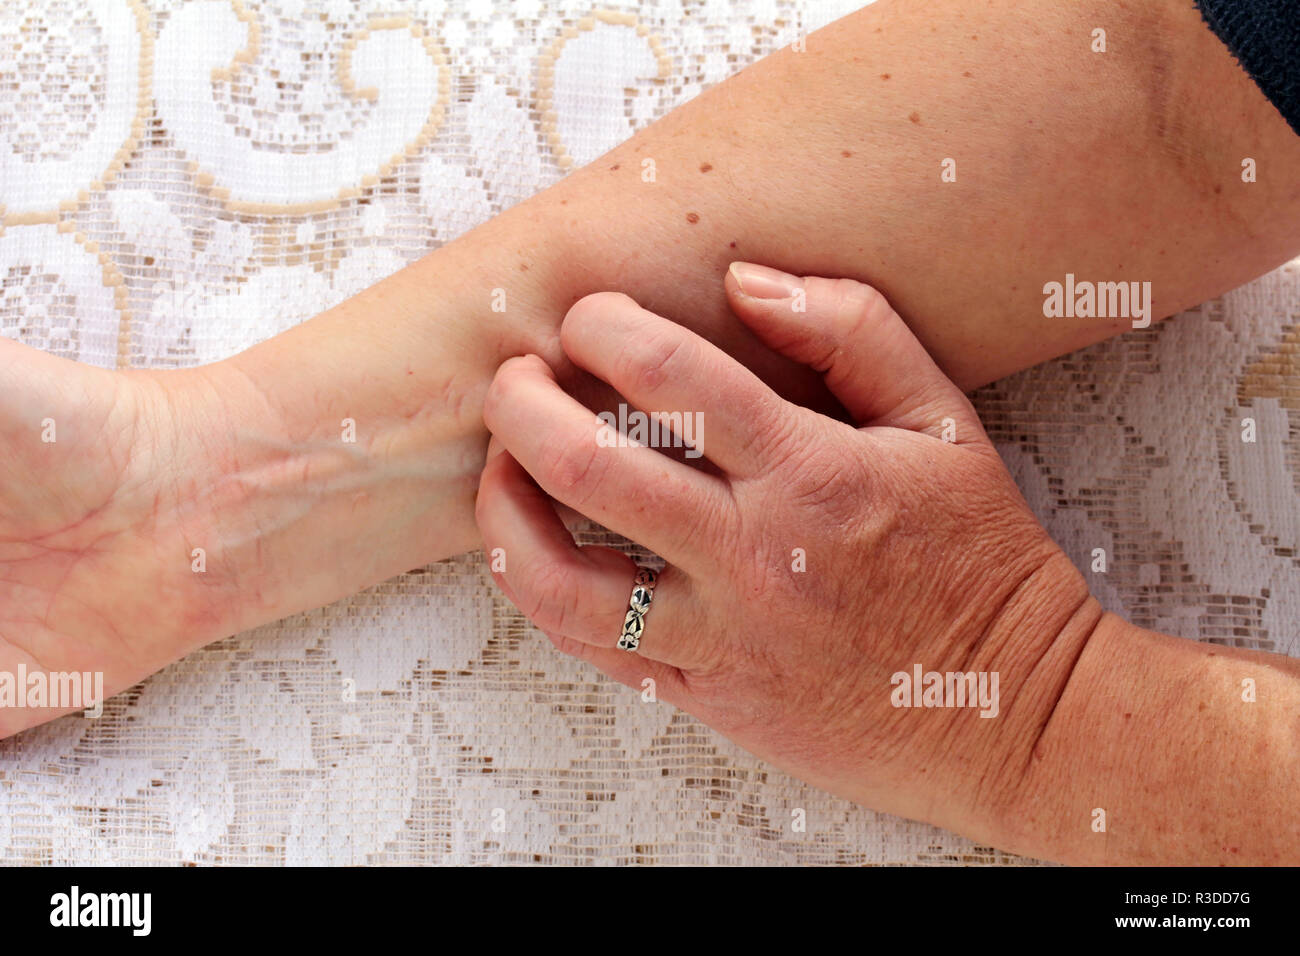 dry itchy skin Stock Photo